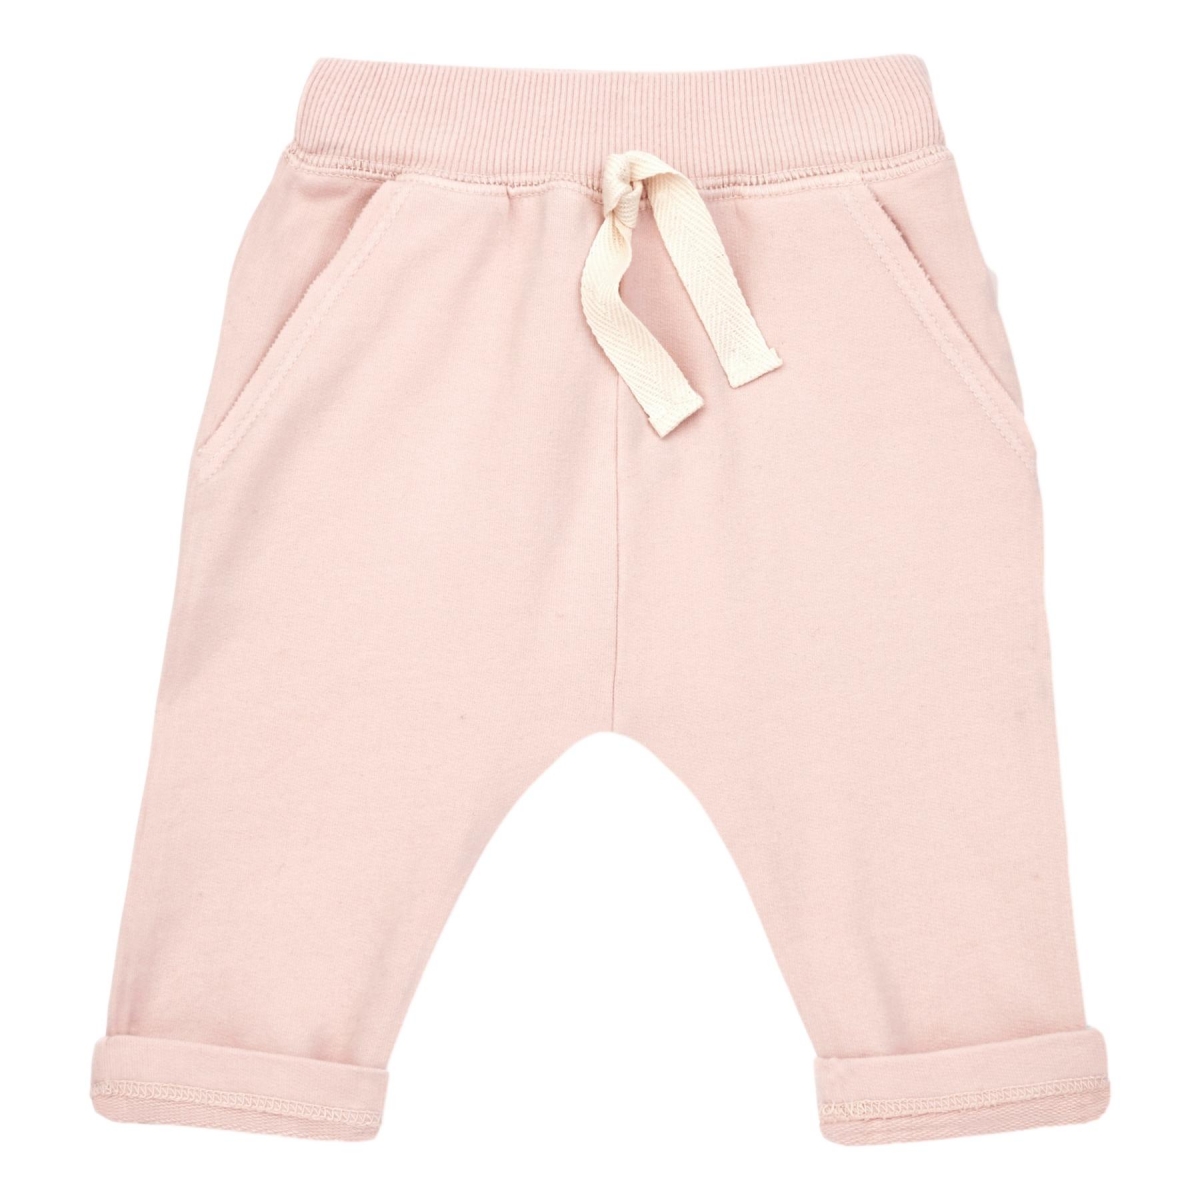 1 + in the family - Jofre Long Pants Rose - Polainas y pantalones - SS21-JOFRE-ROSE 